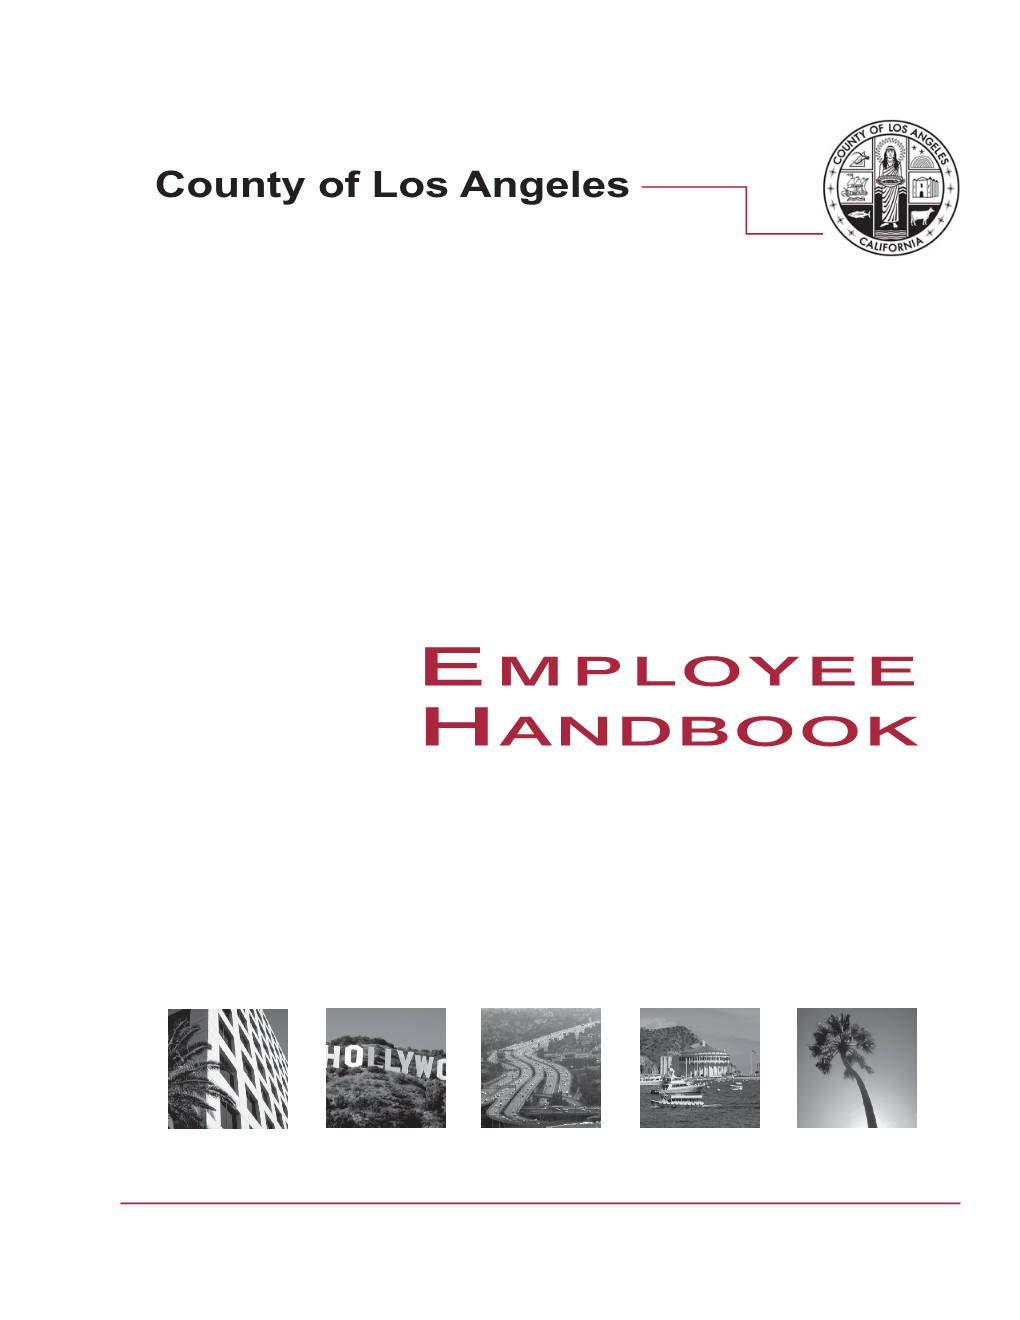 EMPLOYEE HANDBOOK This Project Was Supported and Financed Through the Productivity Investment Fund of the Quality and Productivity Commission, County of Los Angeles